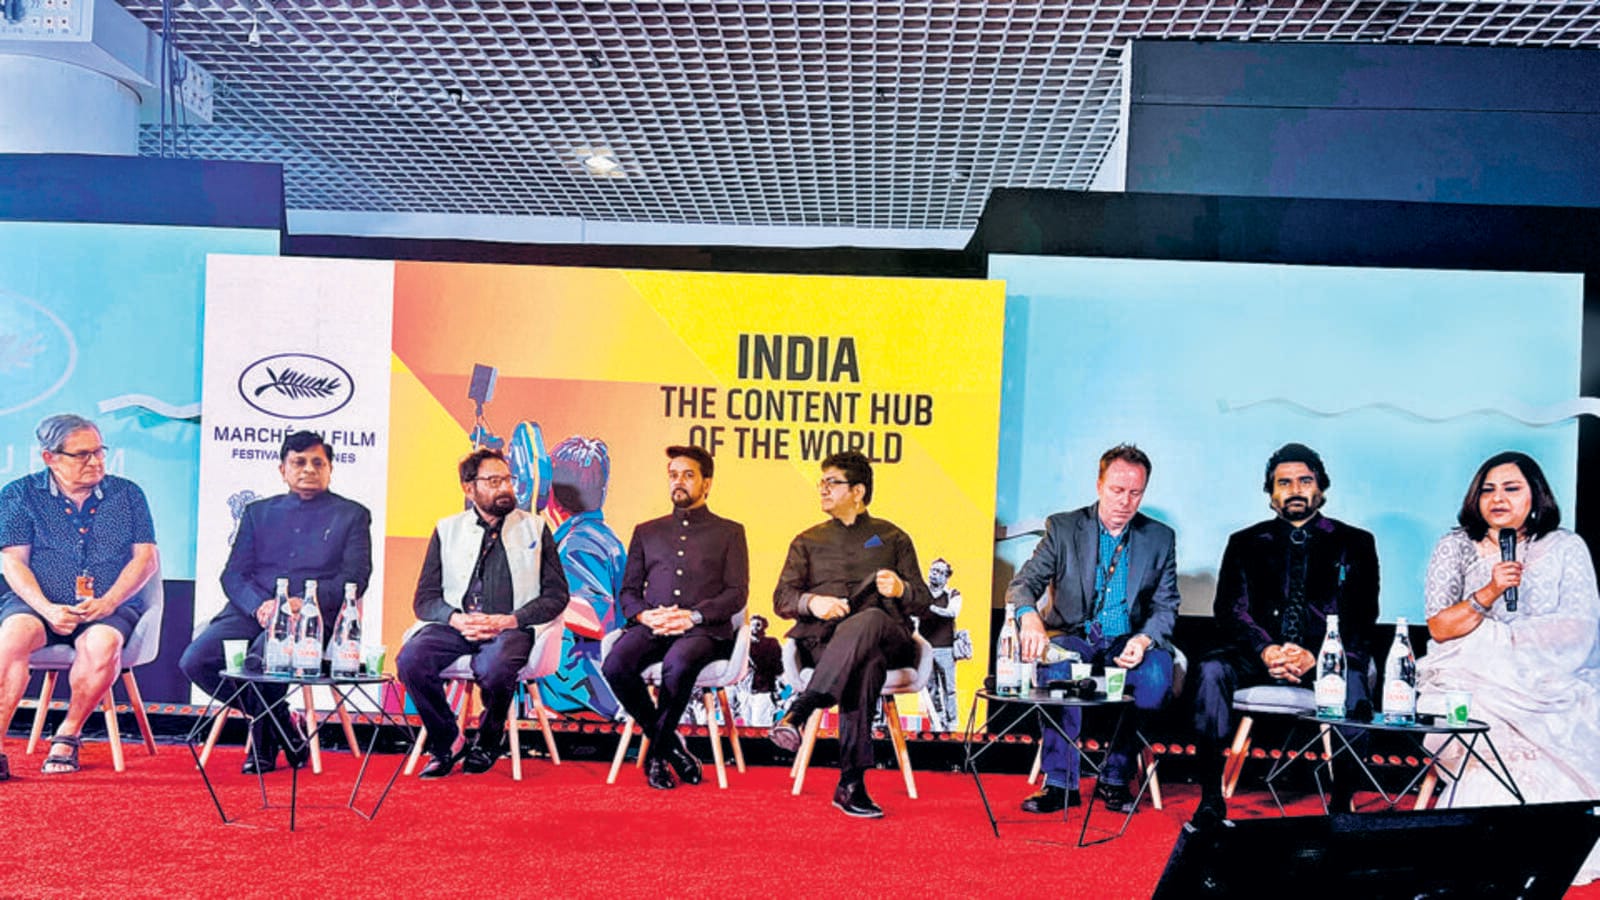 #HTCityAtCannes: On the way to being global content hub: India Forum